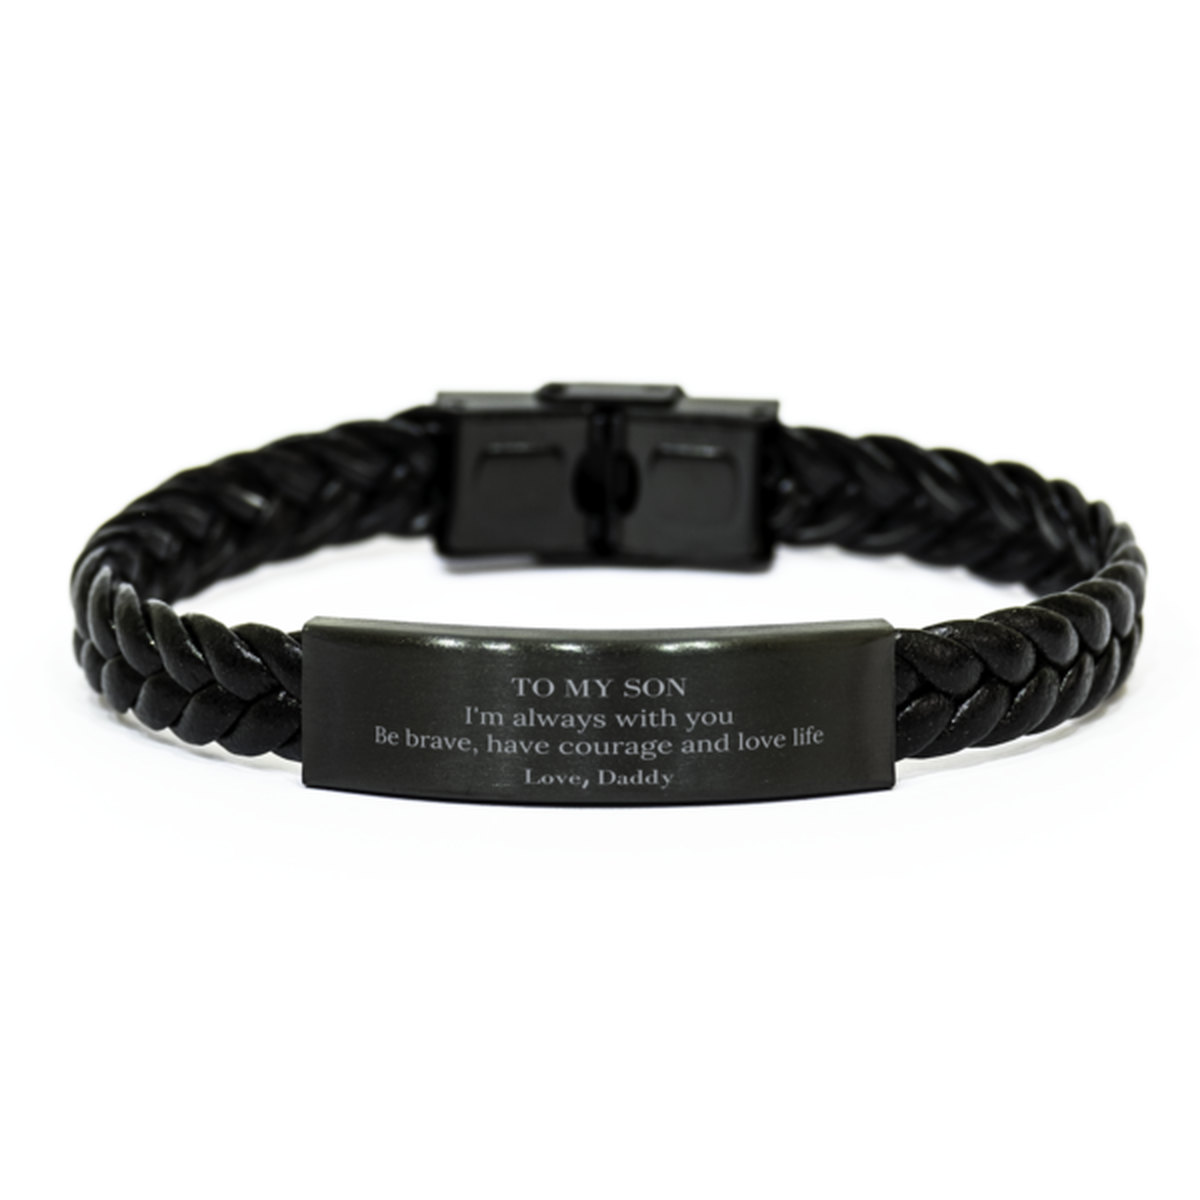 To My Son Gifts from Daddy, Unique Braided Leather Bracelet Inspirational Christmas Birthday Graduation Gifts for Son I'm always with you. Be brave, have courage and love life. Love, Daddy